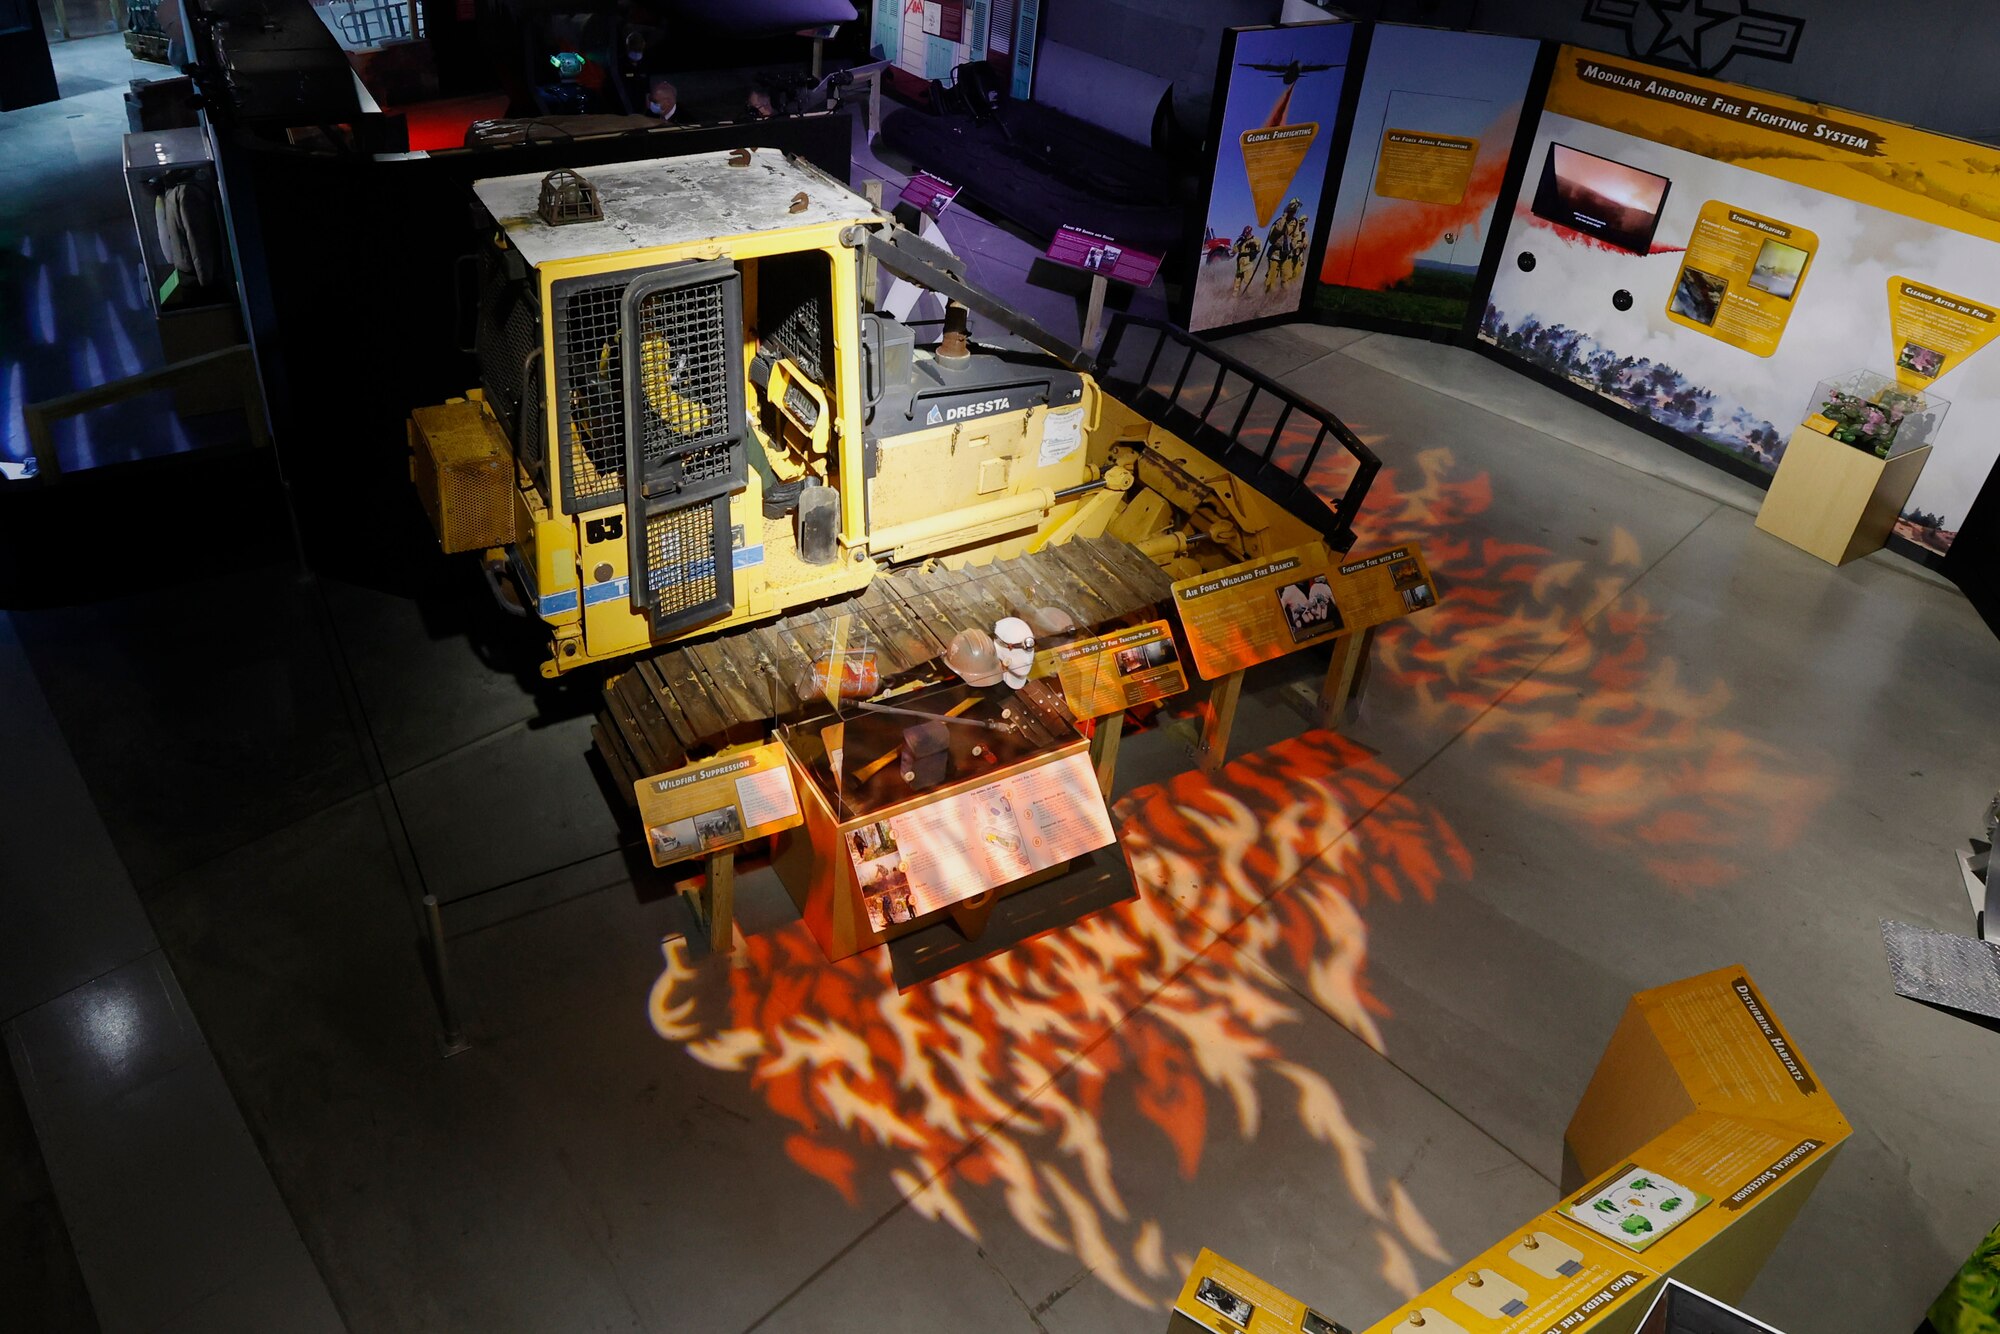 Image of the bulldozer used by firefighters, which is placed in the Global Firefighting mission portion of the Humanitarian exhibit. In front of the bulldozer, lights on shining on the floor to replicate flames.